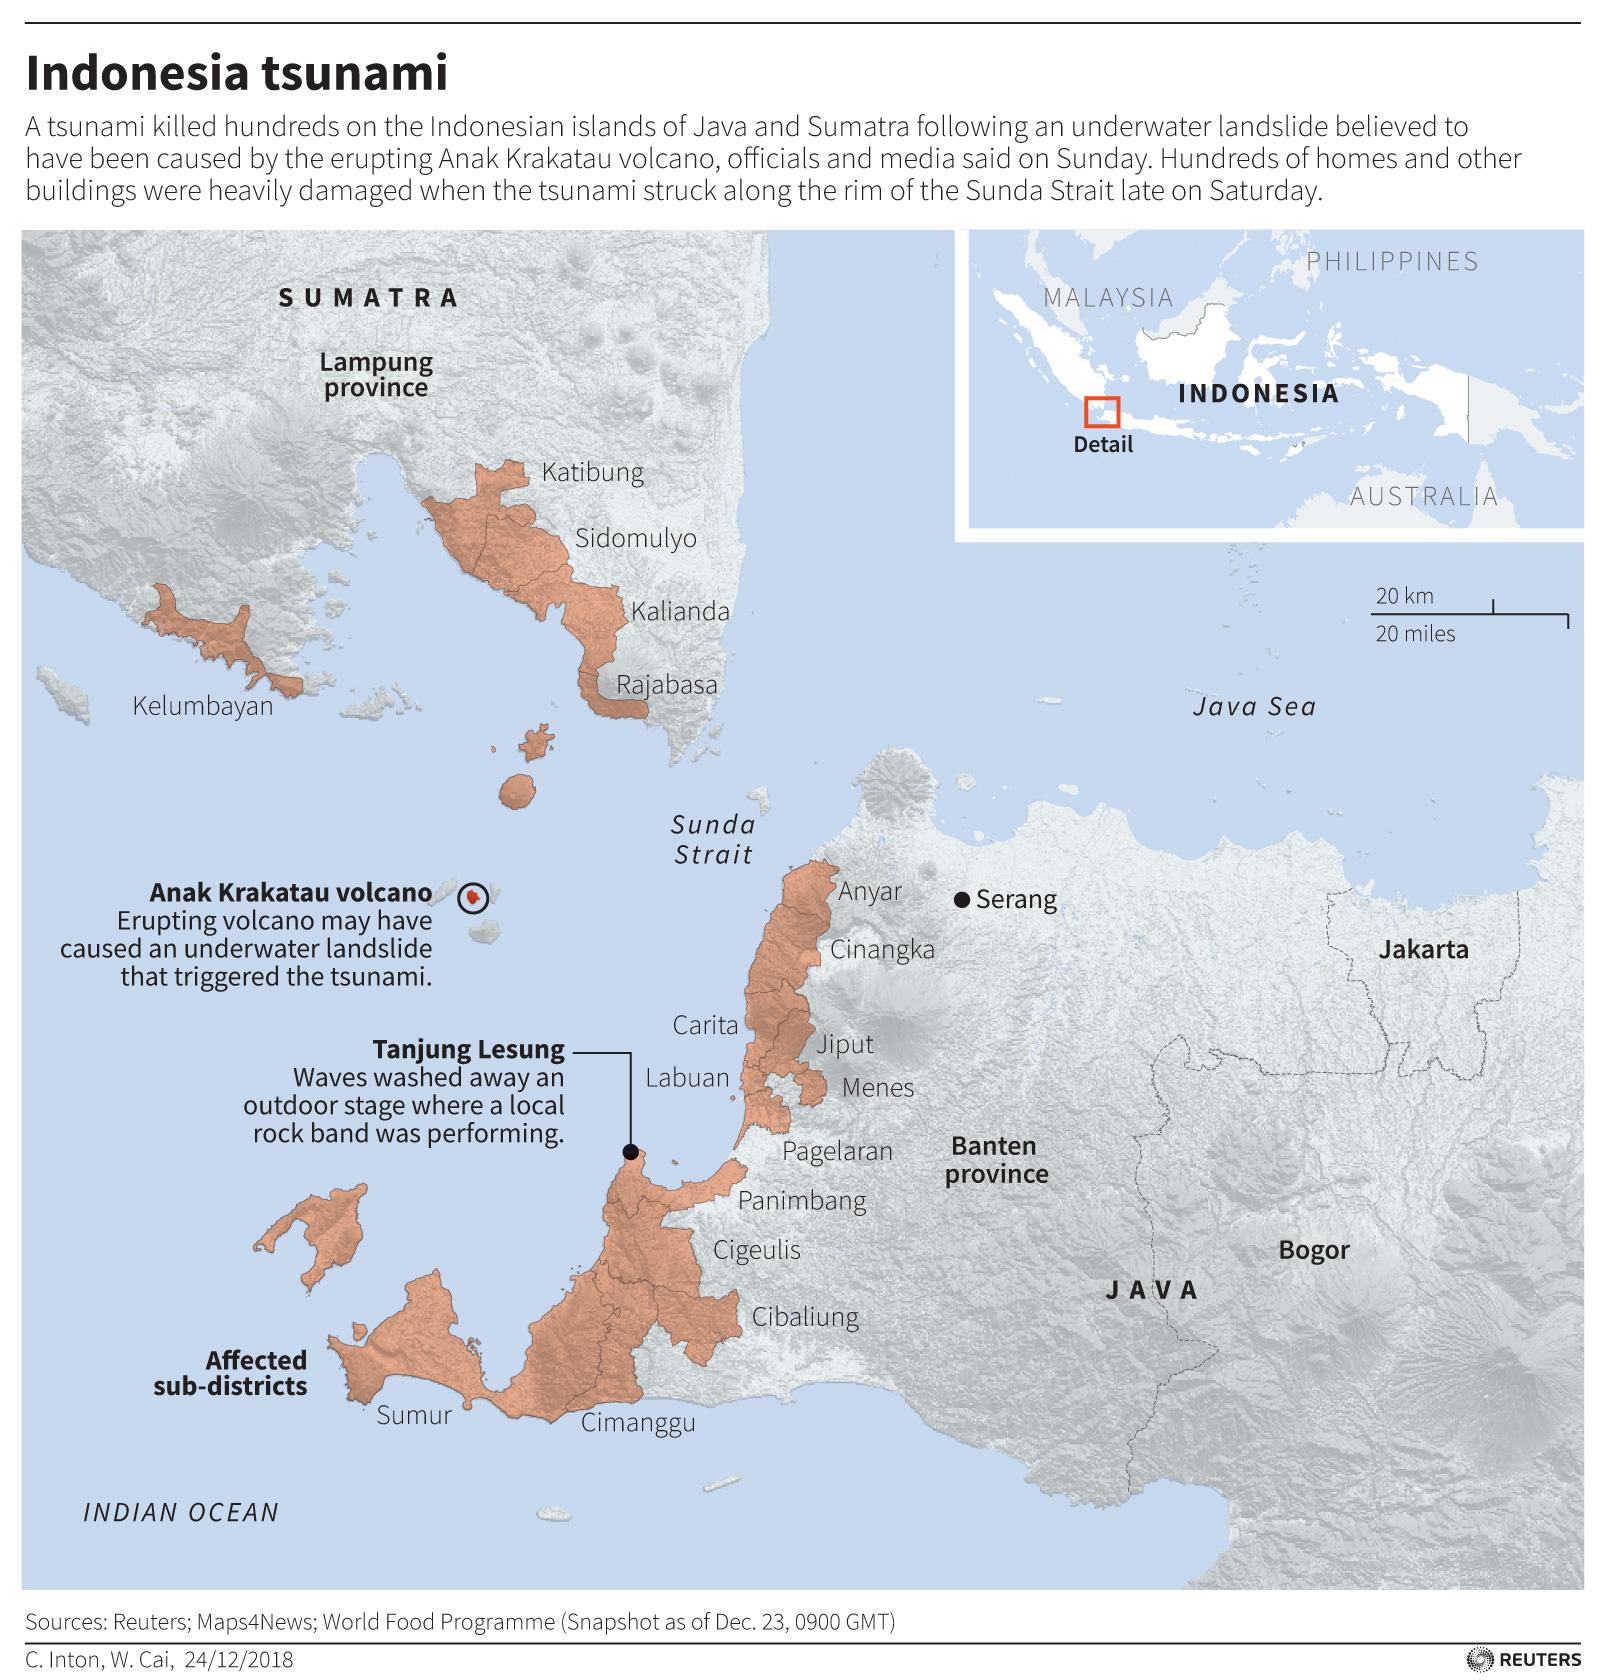 A map of Indonesia has a red zone showing areas where a tsunami occurred.